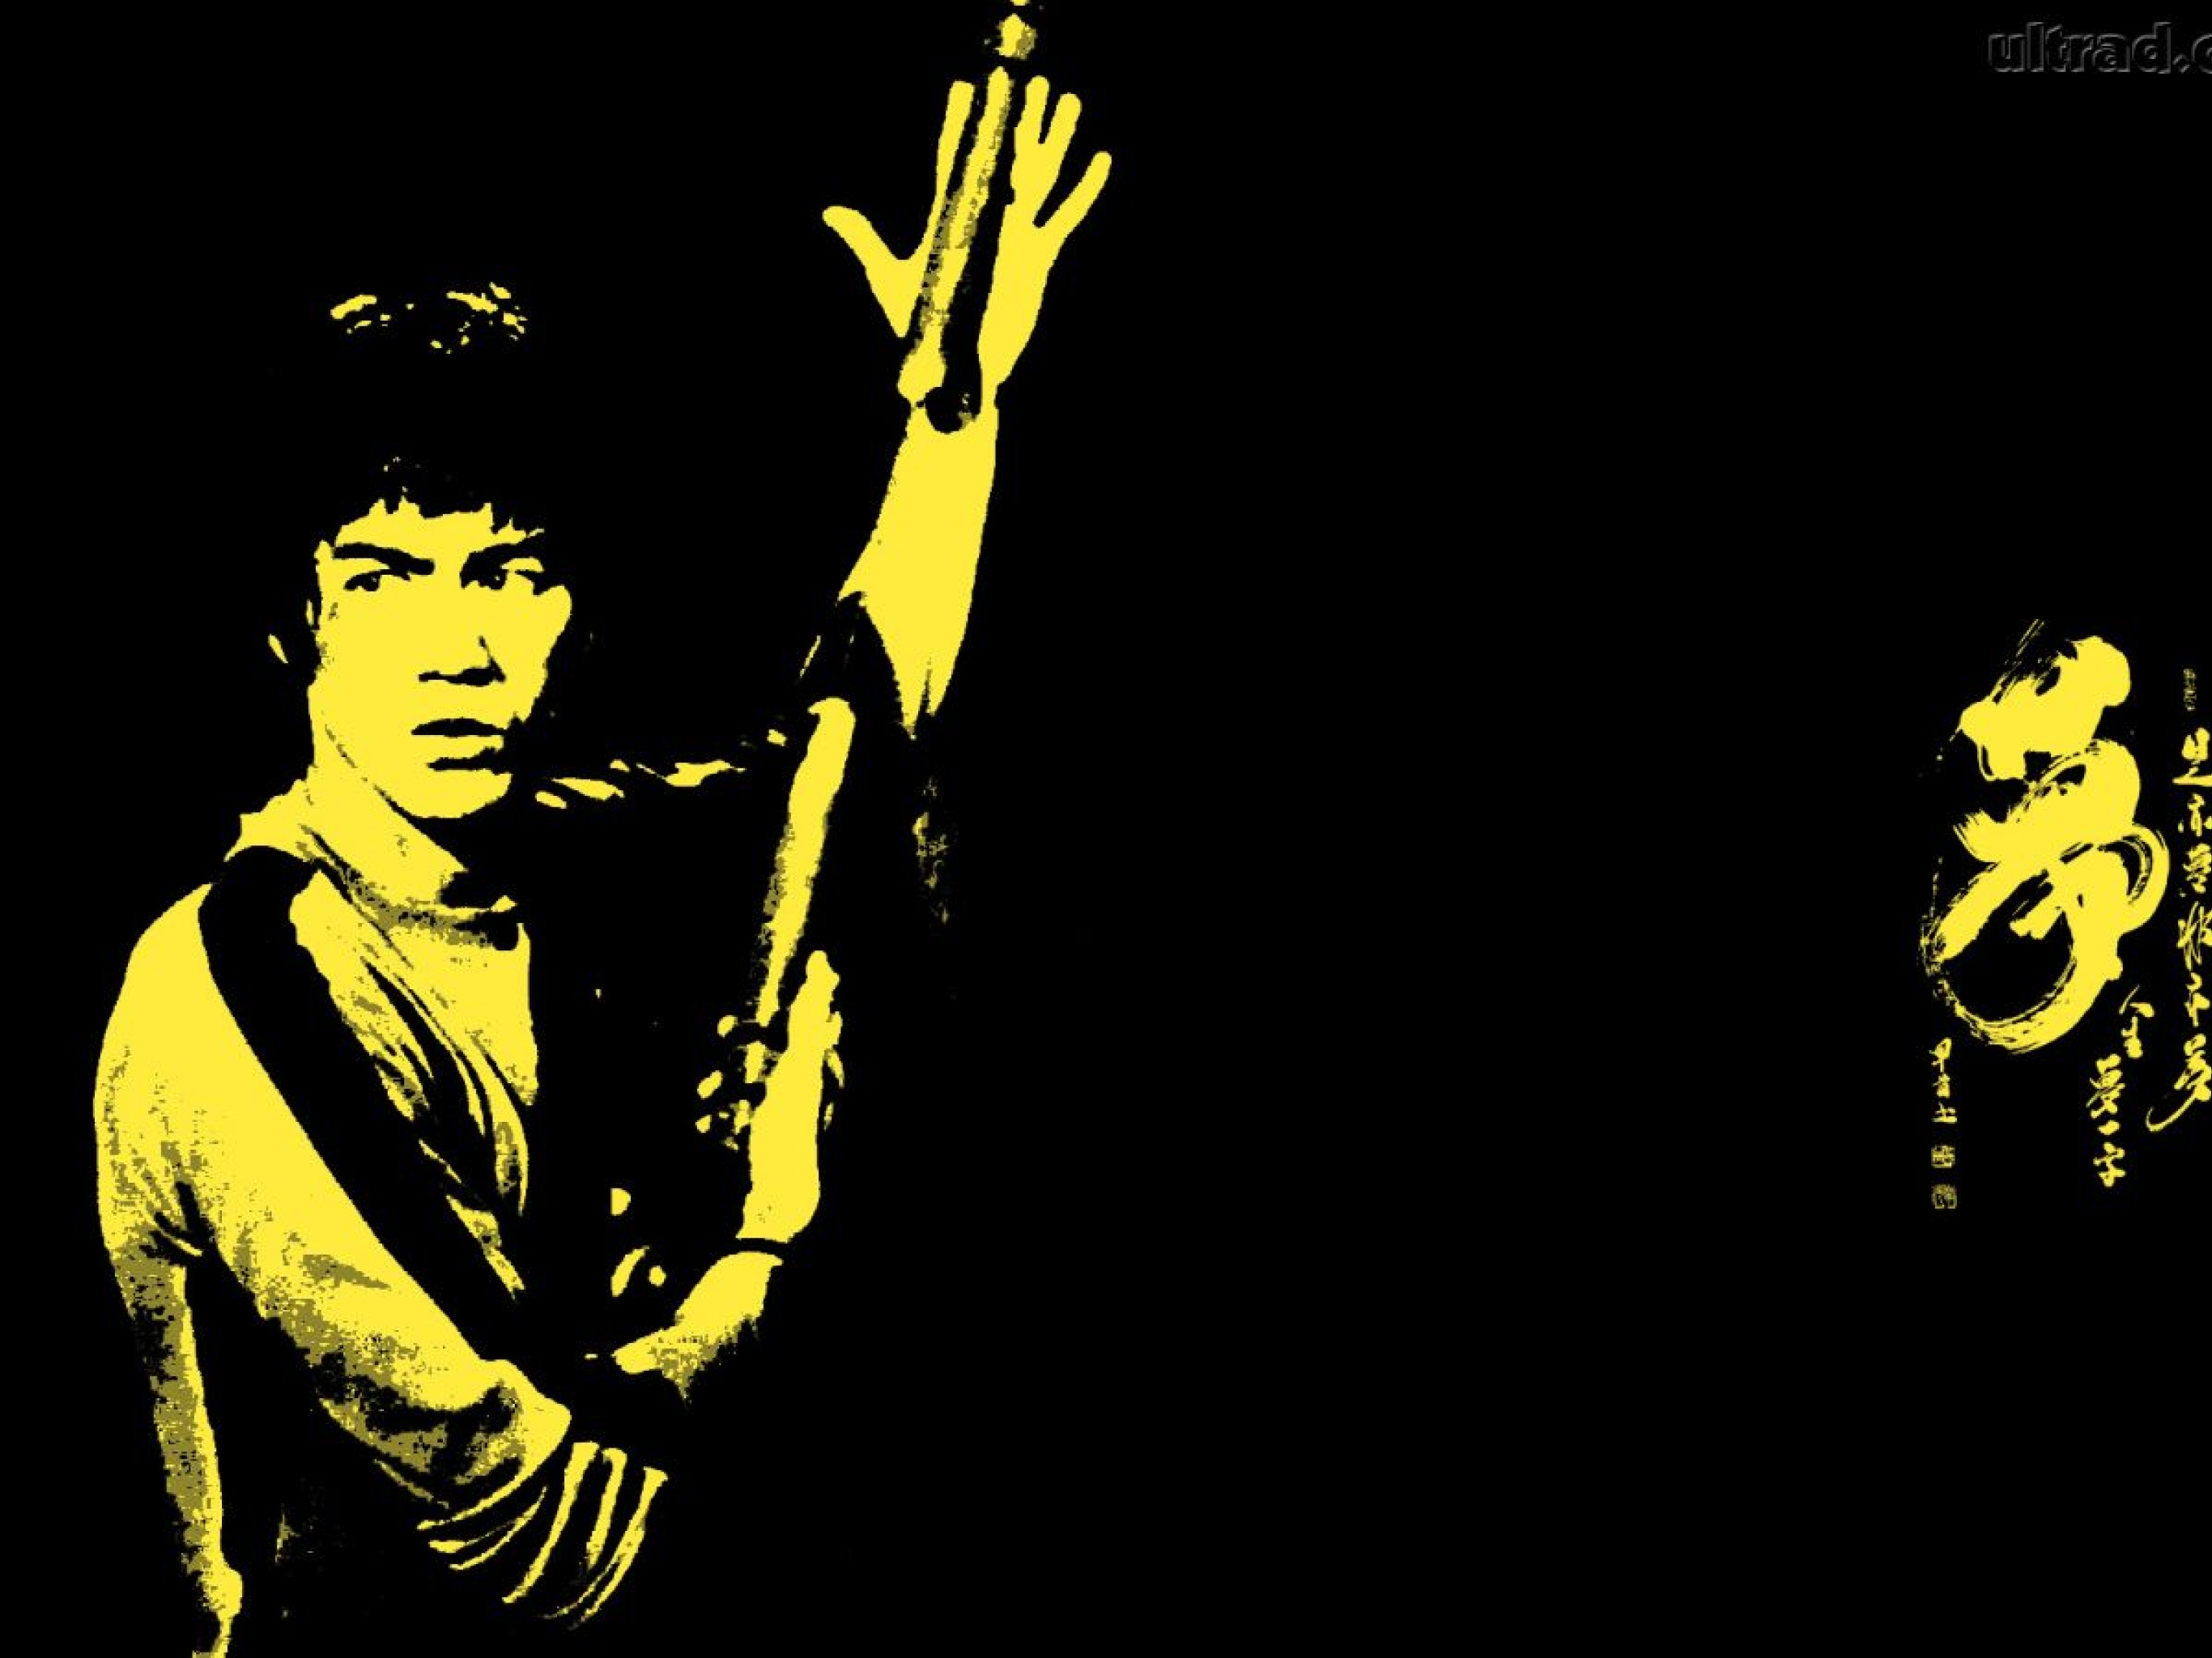 2732x48 Bruce Lee Abstract Hd Wallpaper 2732x48 Resolution Wallpaper Hd Celebrities 4k Wallpapers Images Photos And Background Wallpapers Den